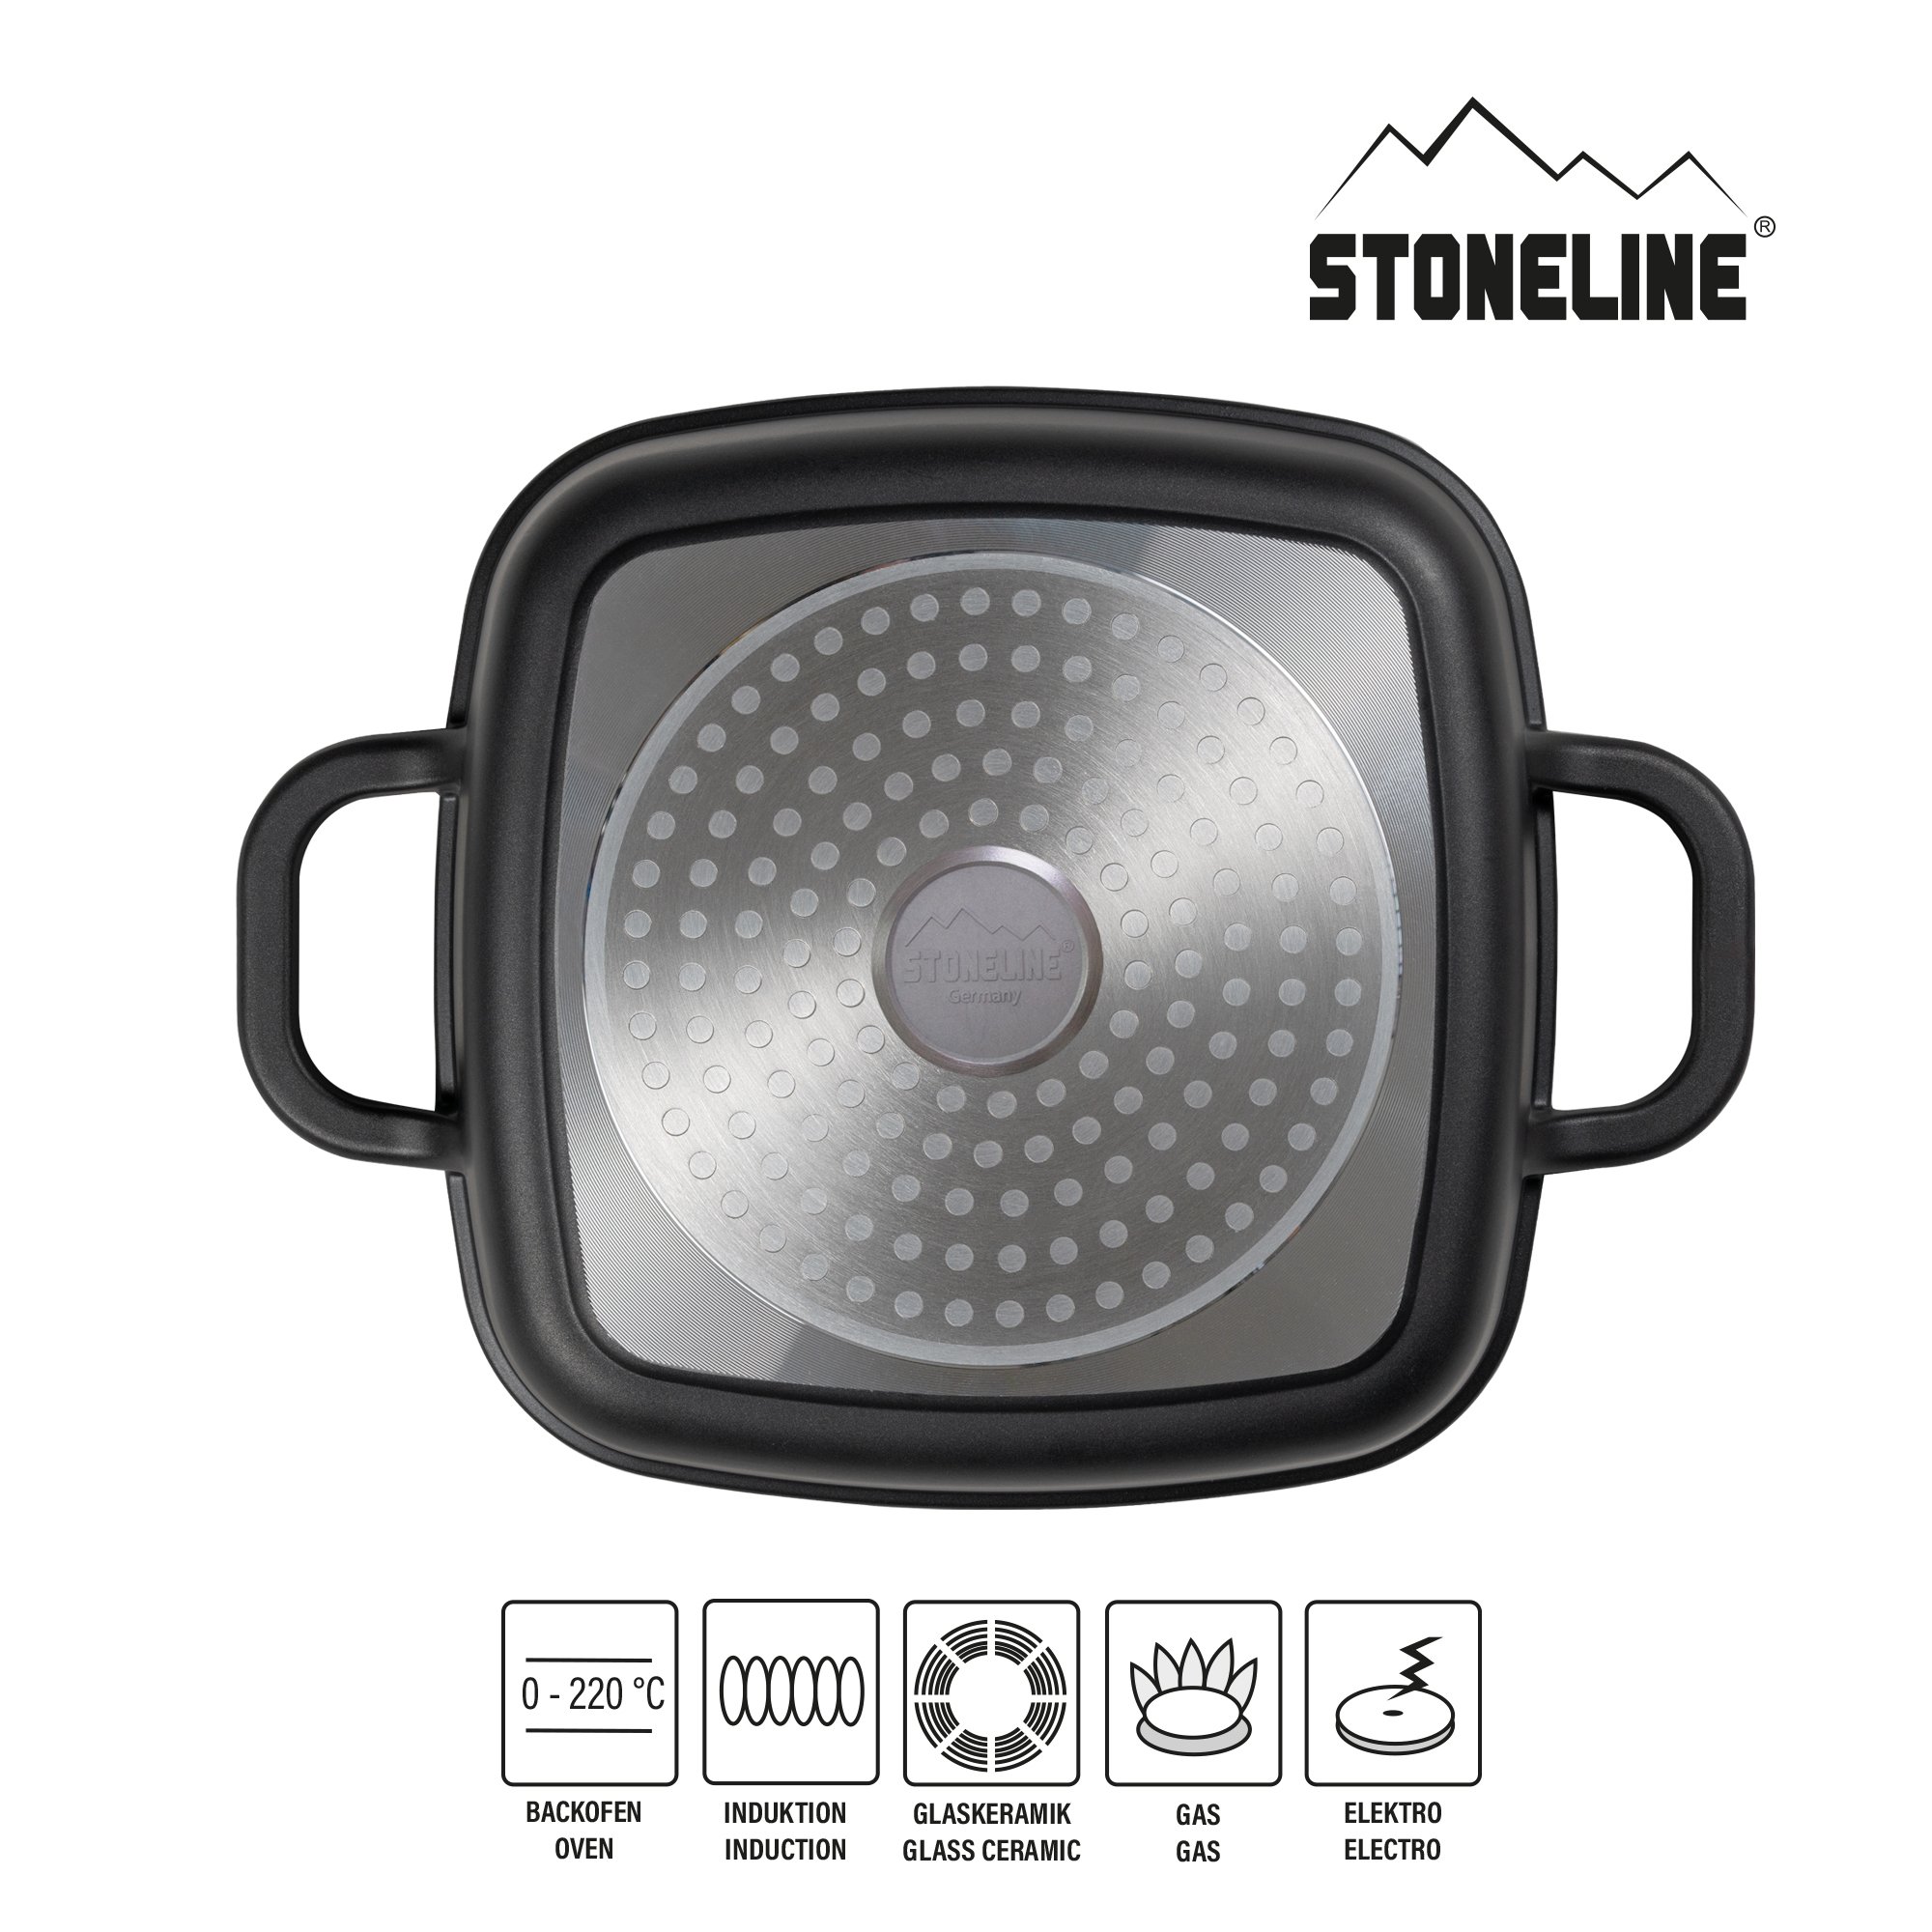 STONELINE® Square Serving Pan 20 cm, with Aroma Lid, Non-Stick Pan Casserole | gold